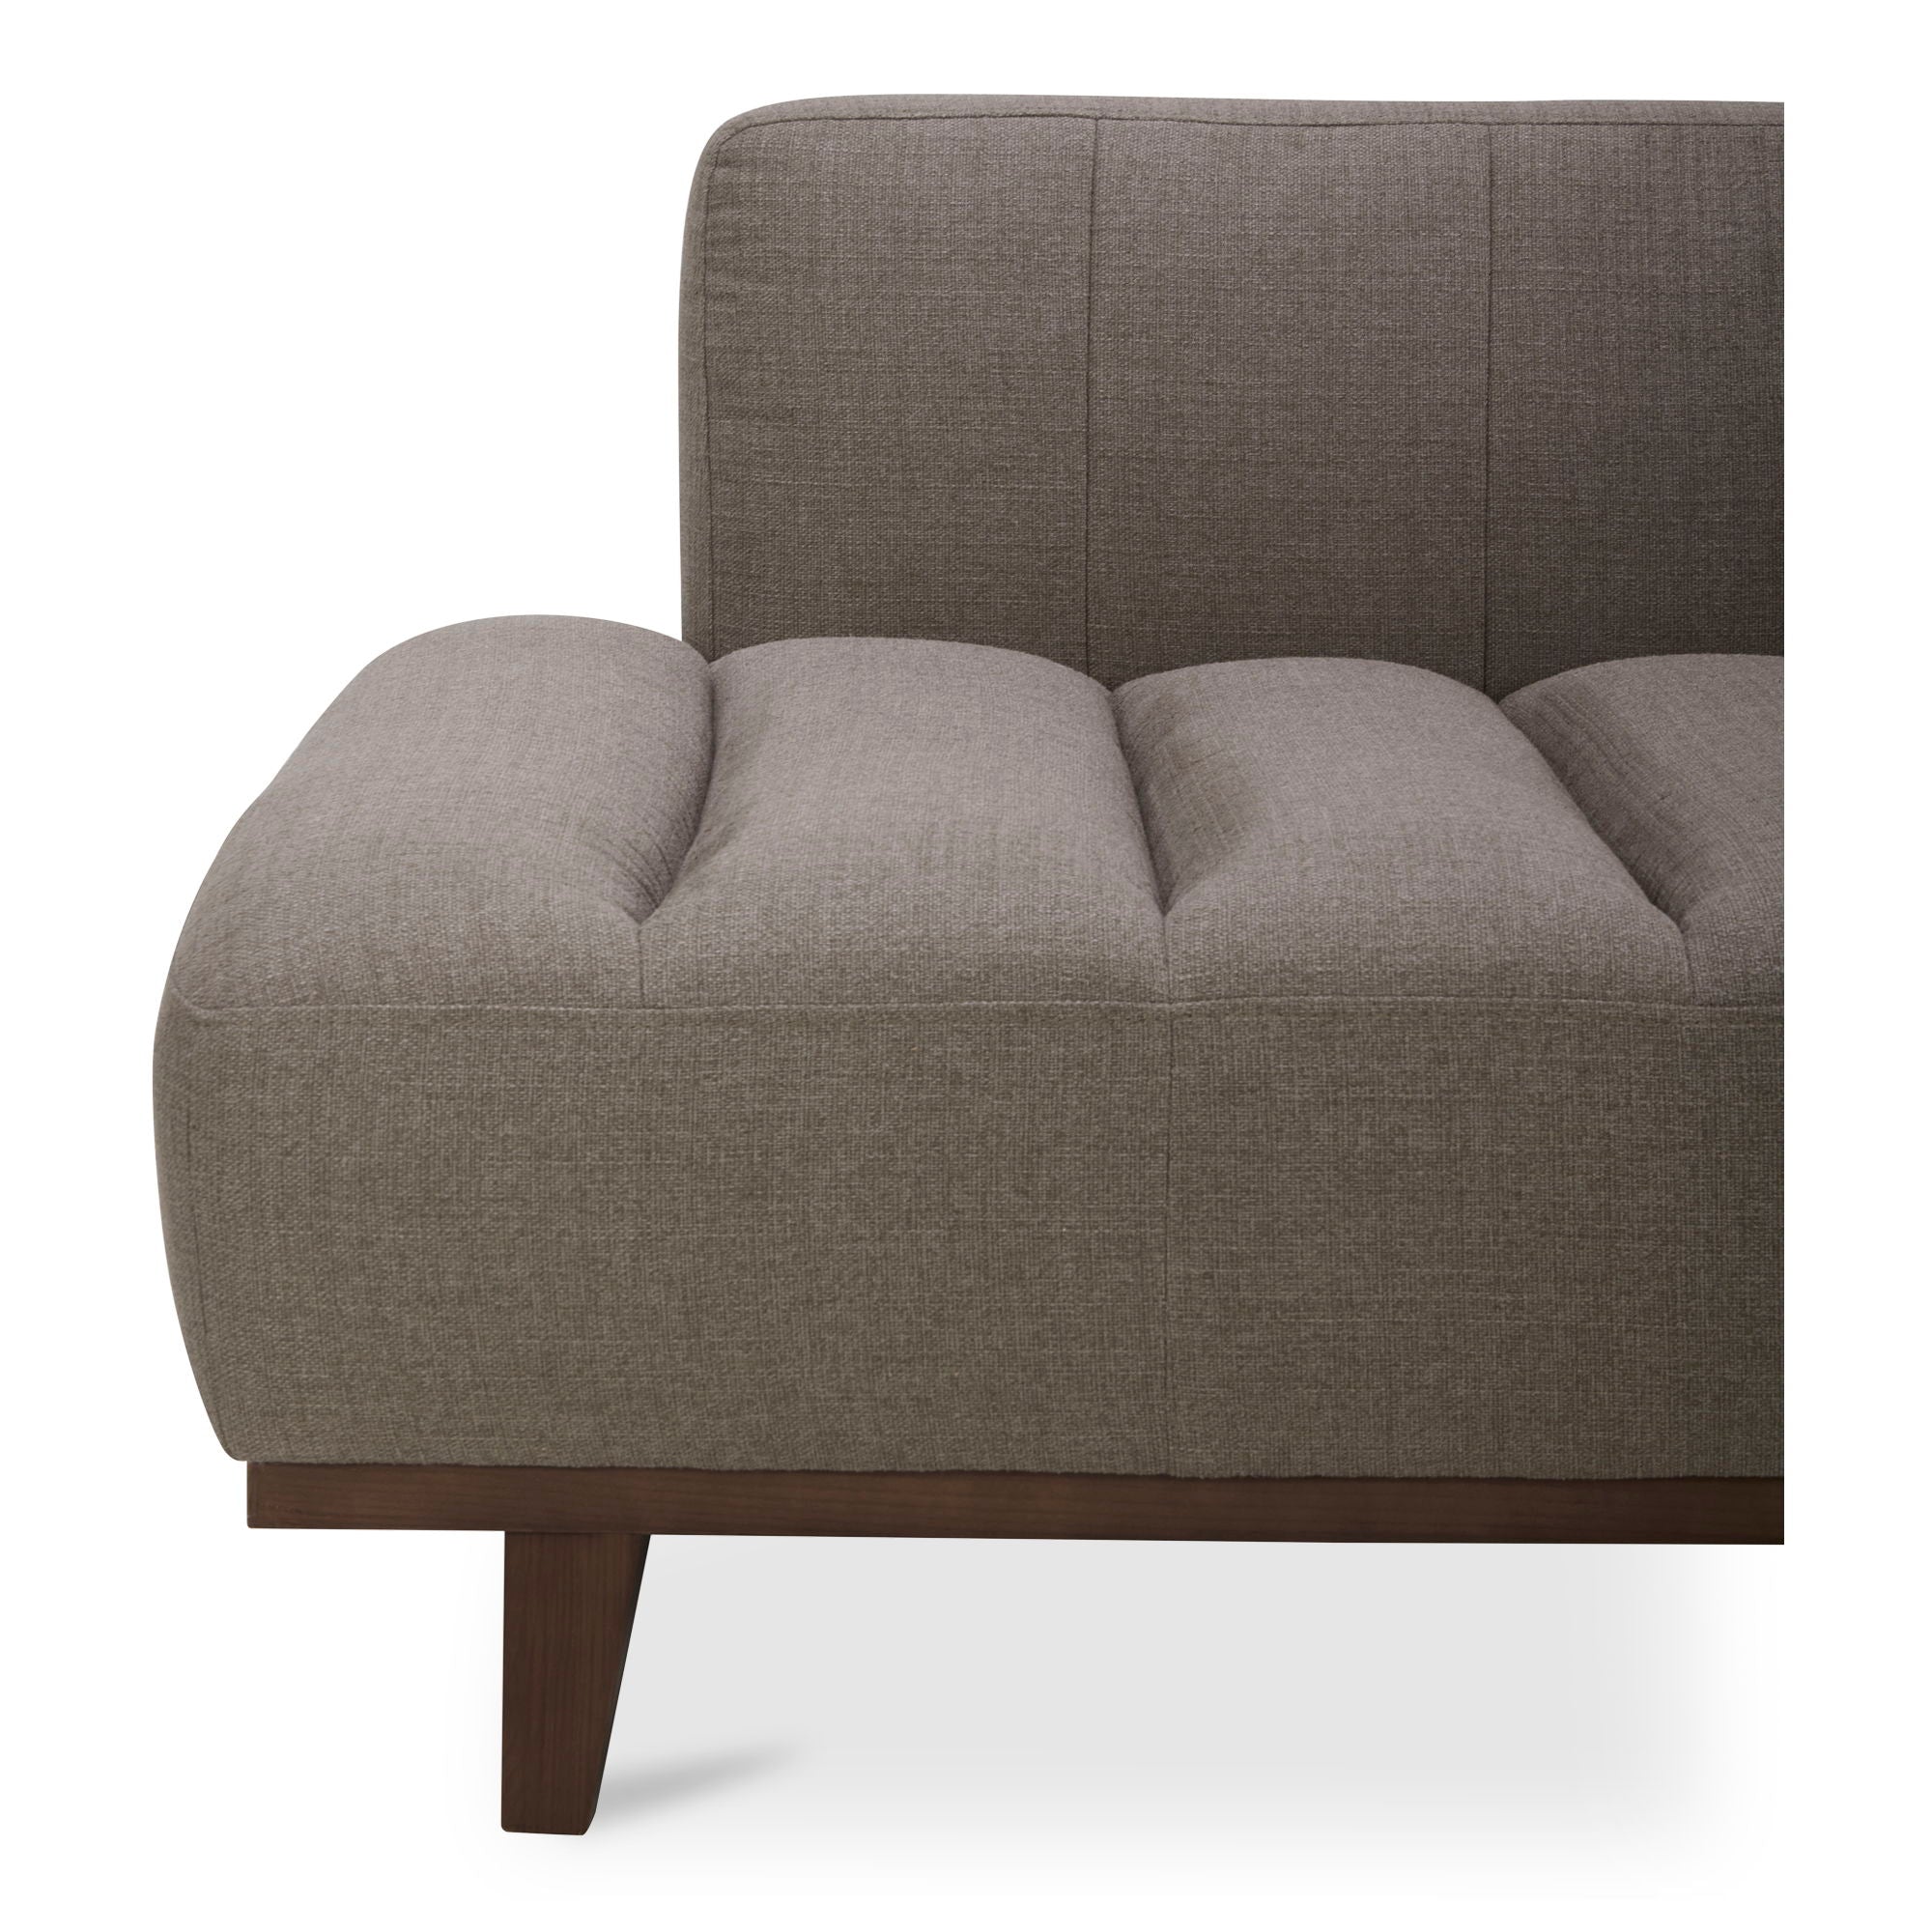 Bennett - Daybed - Taupe